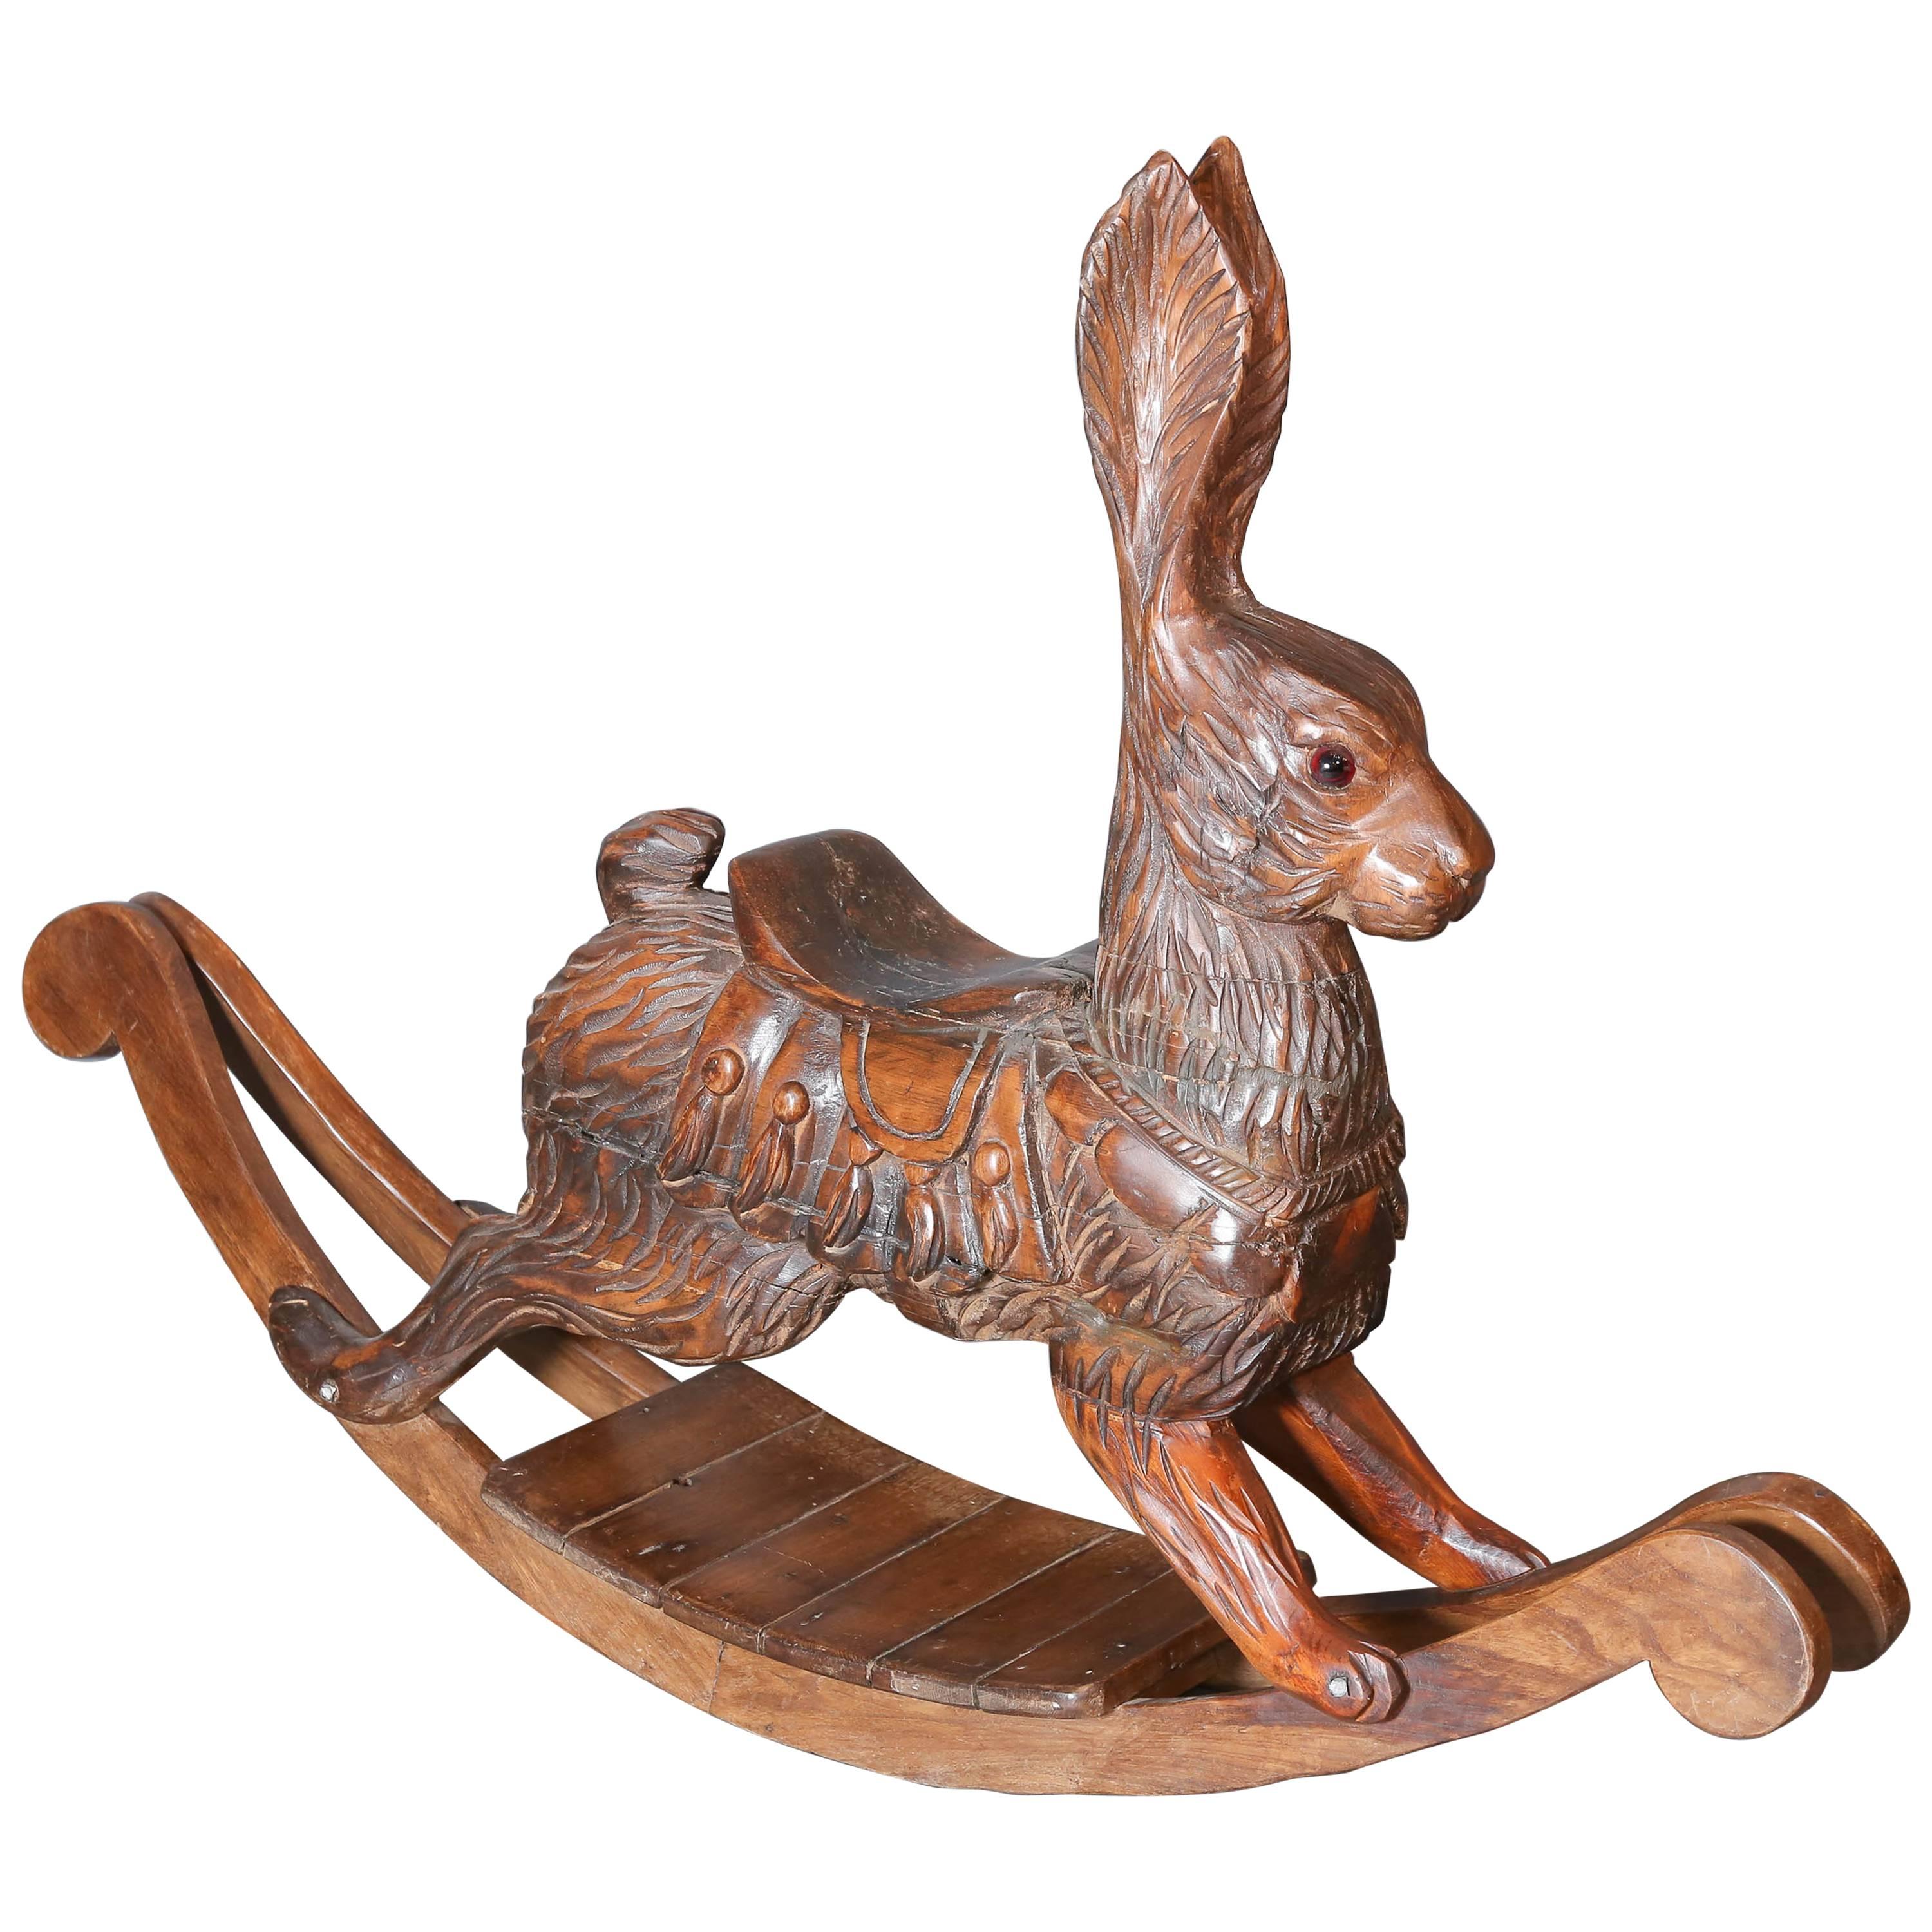 Carved Carousel Fruitwood Rabbit converted to Rocker